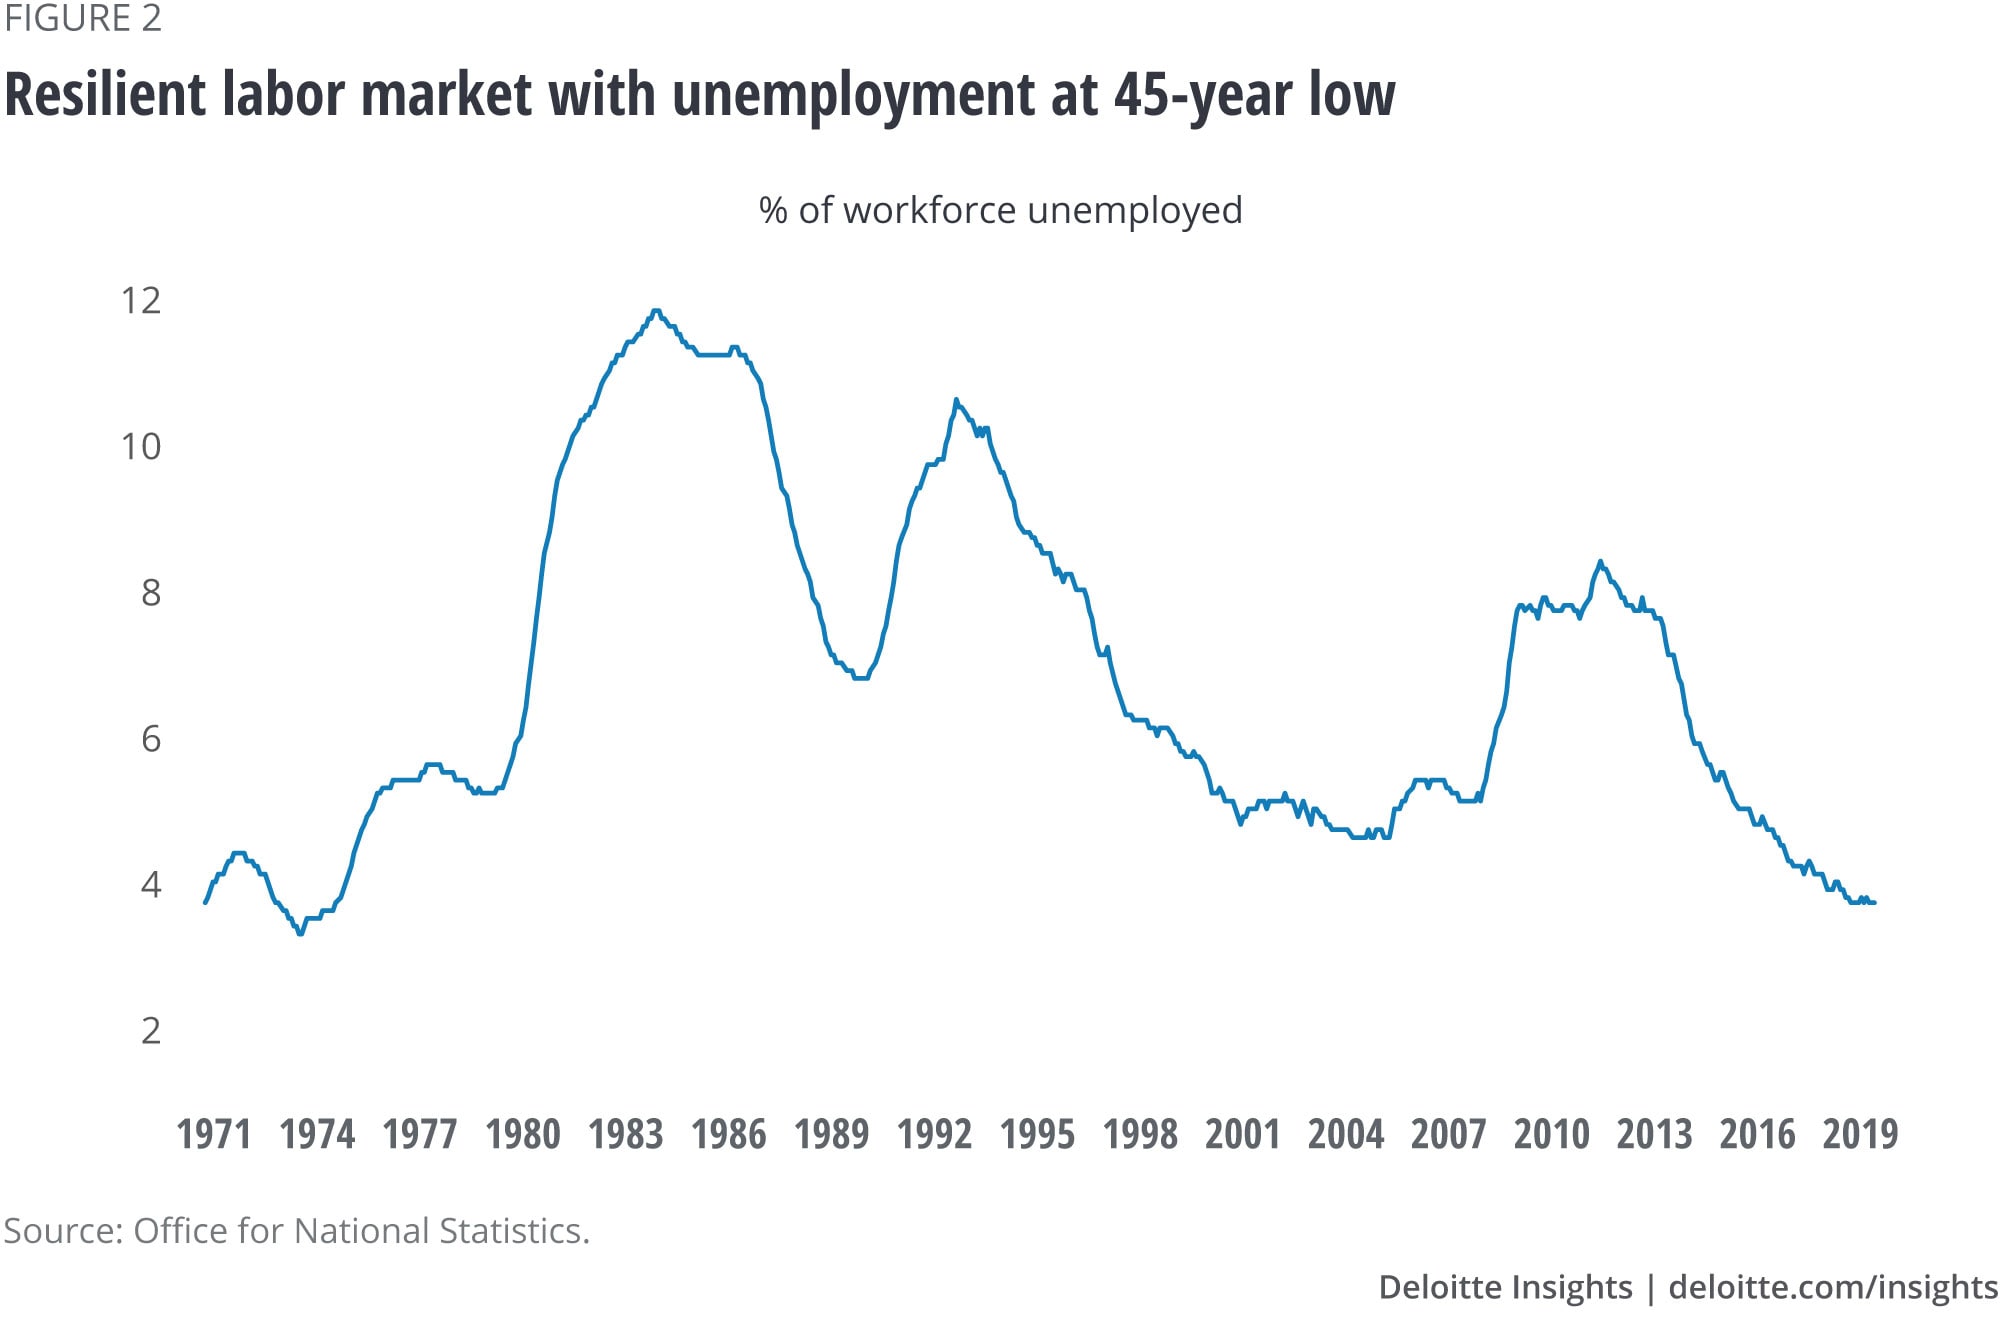 Resilient labor market with unemployment at 45-year low